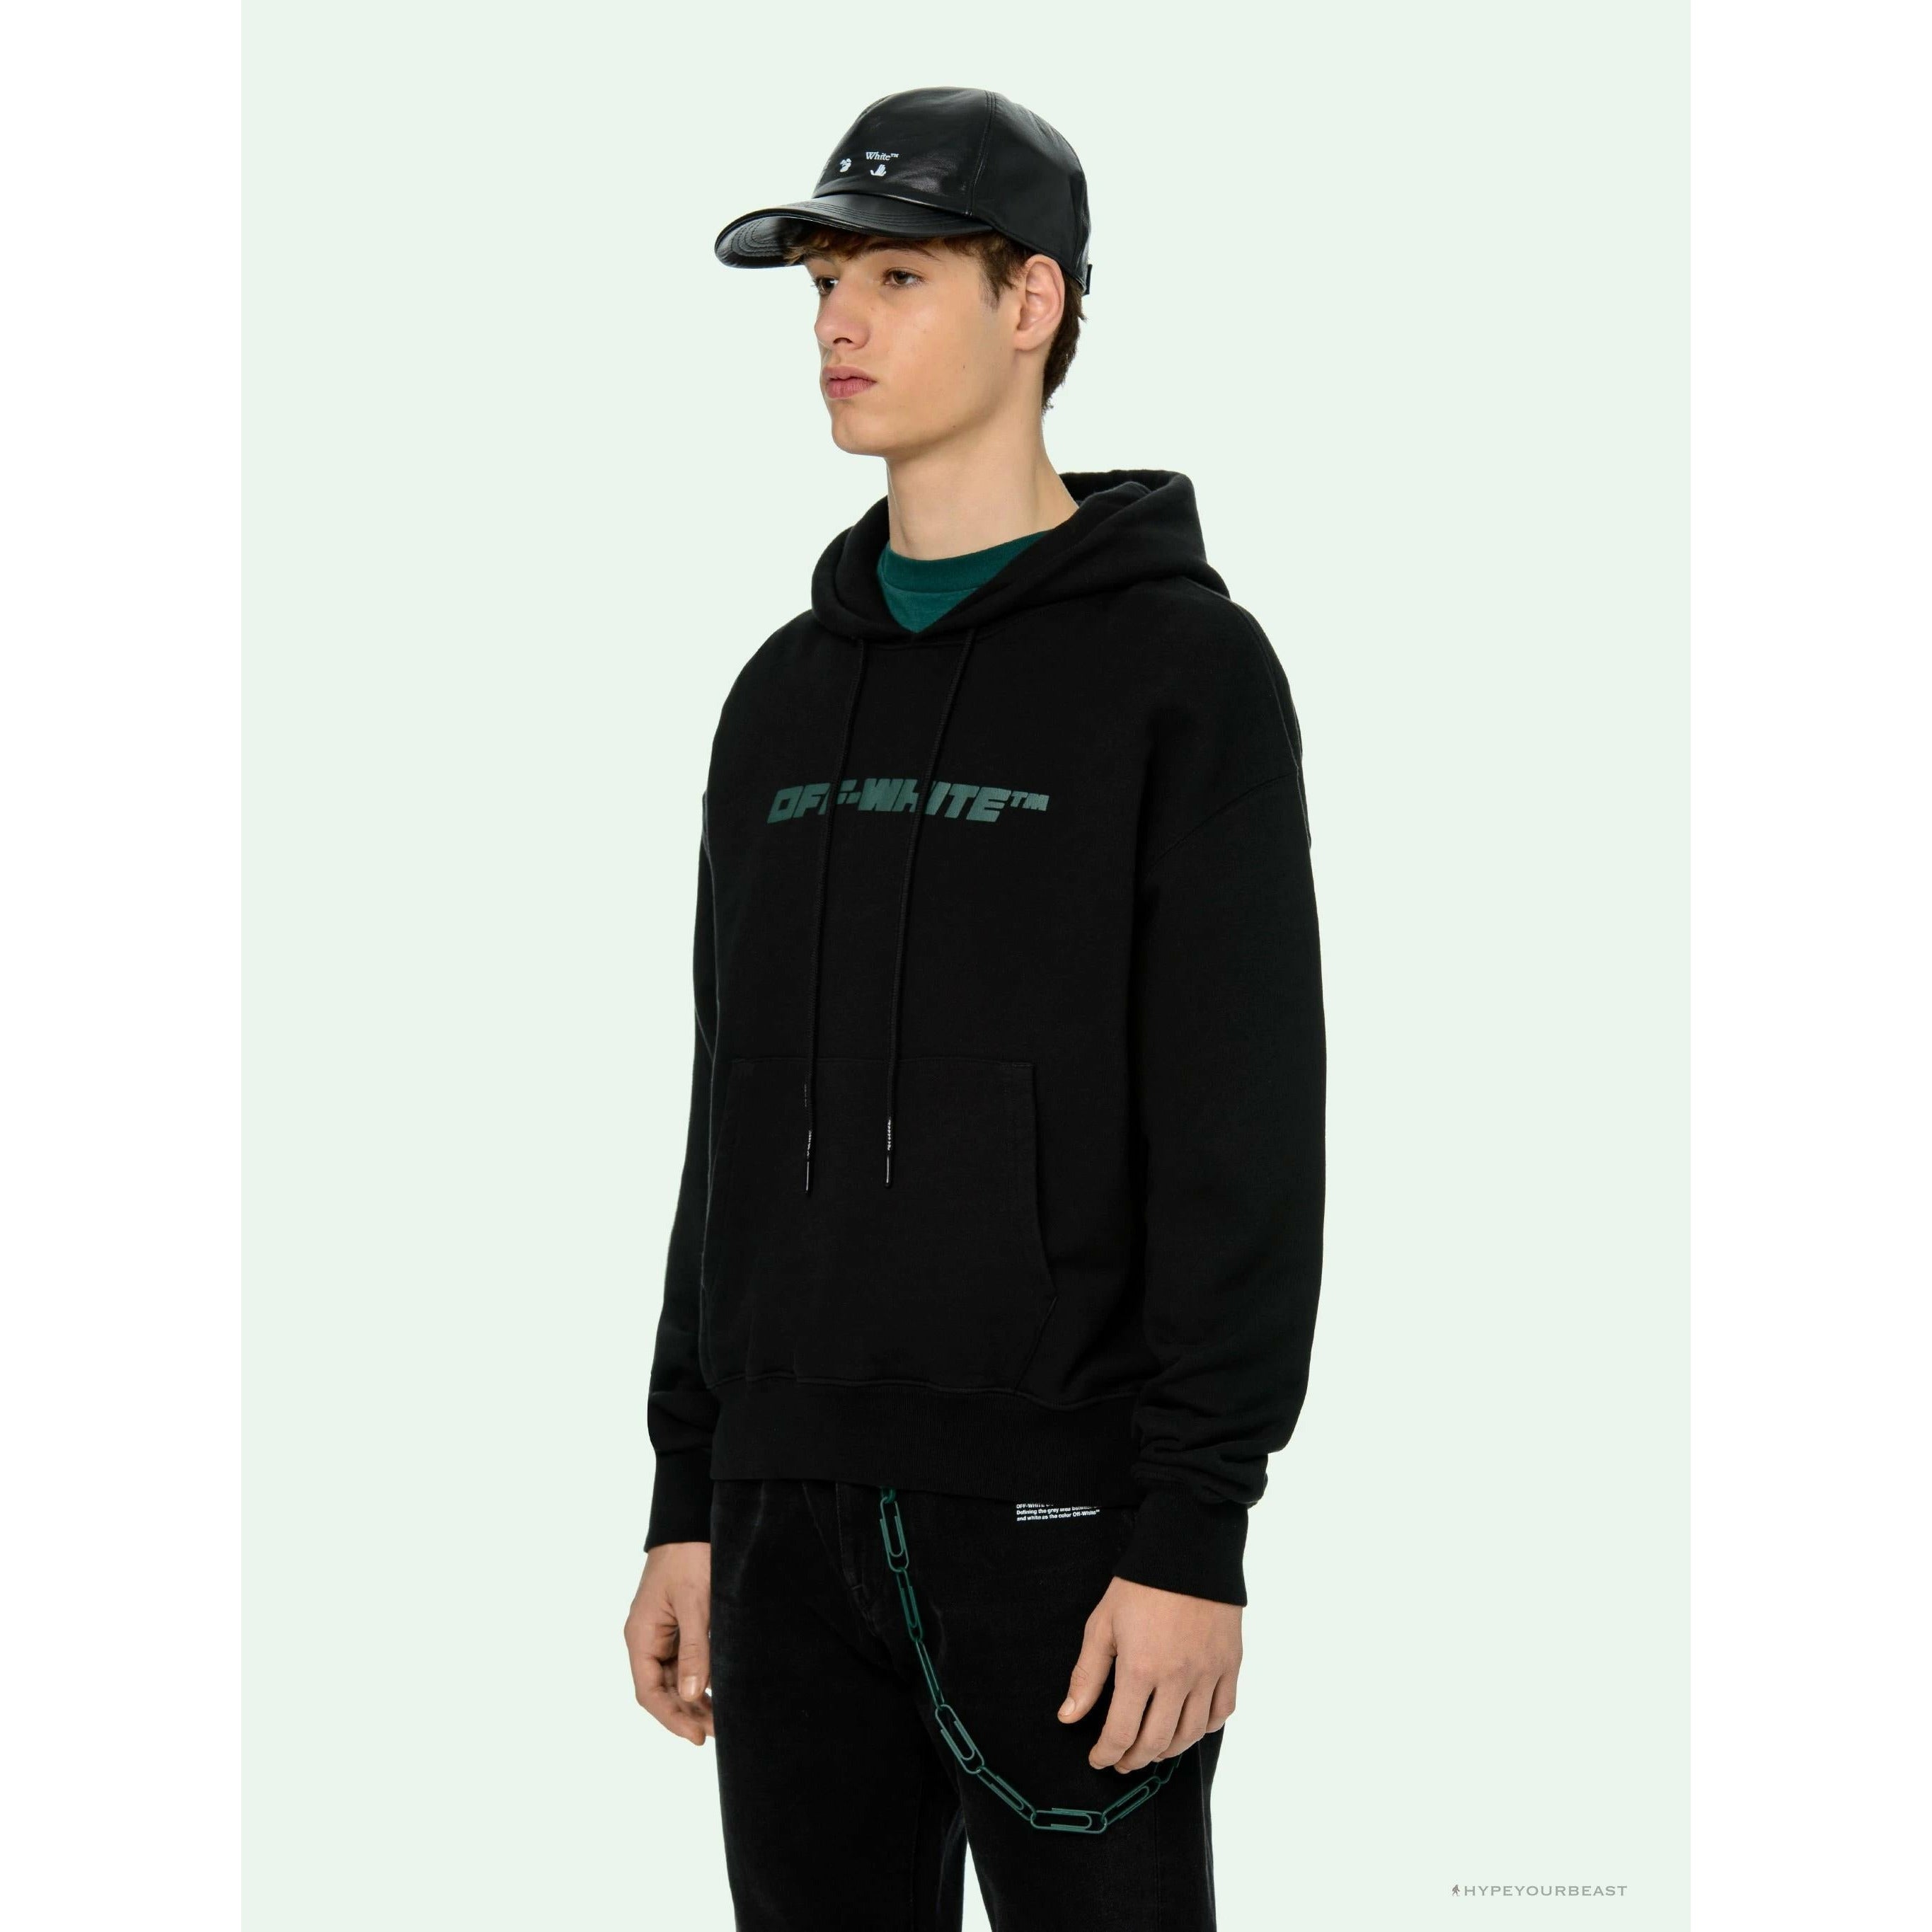 OFF-WHITE Hand-Painted Utility Pole Worker Hoodie 'BLACK'